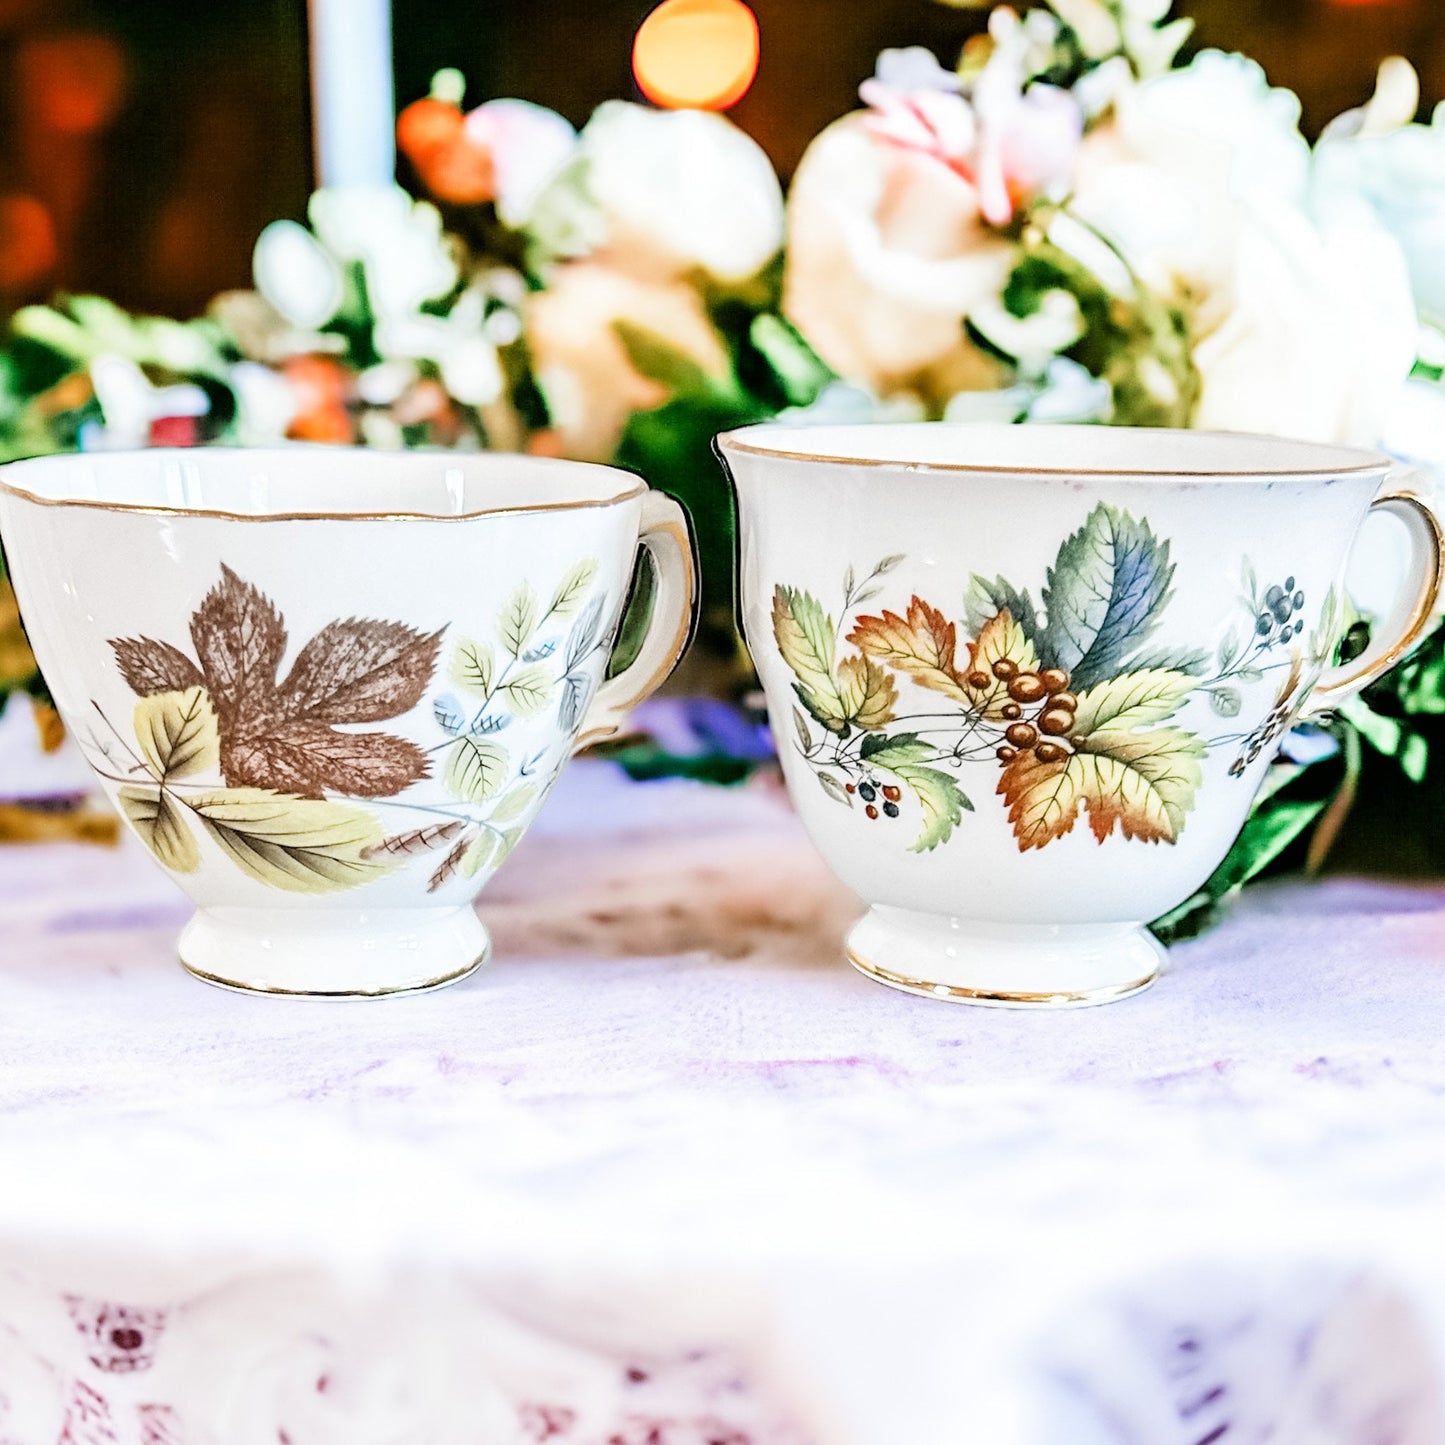 Scented Candle, Vintage, China, Teacup, Best Friend Gifts